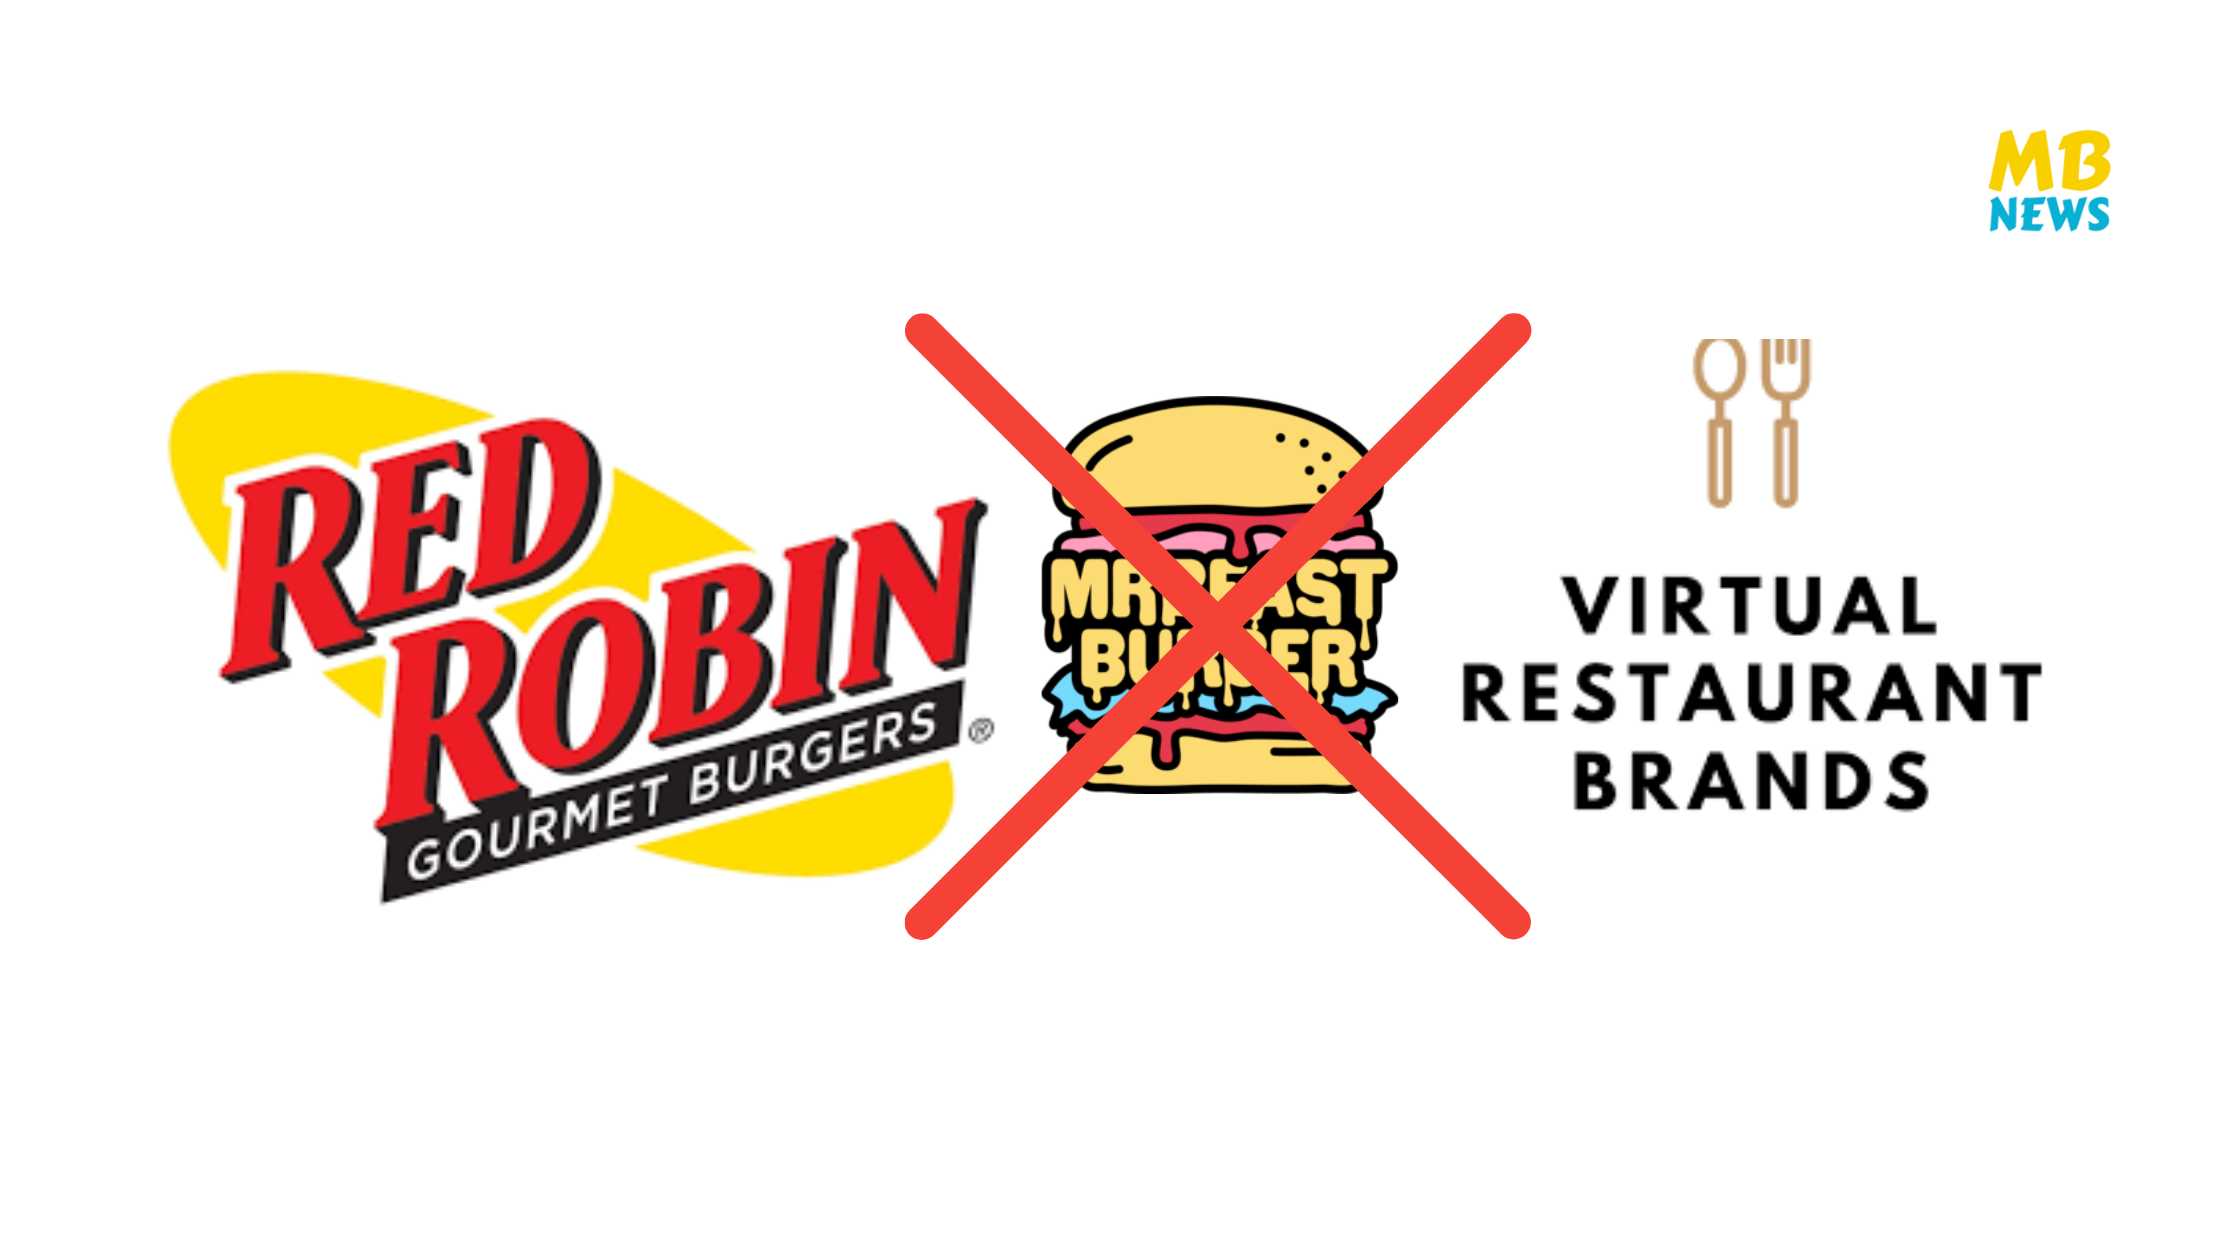 Red Robin Streamlines Operations by Discontinuing Virtual Brands